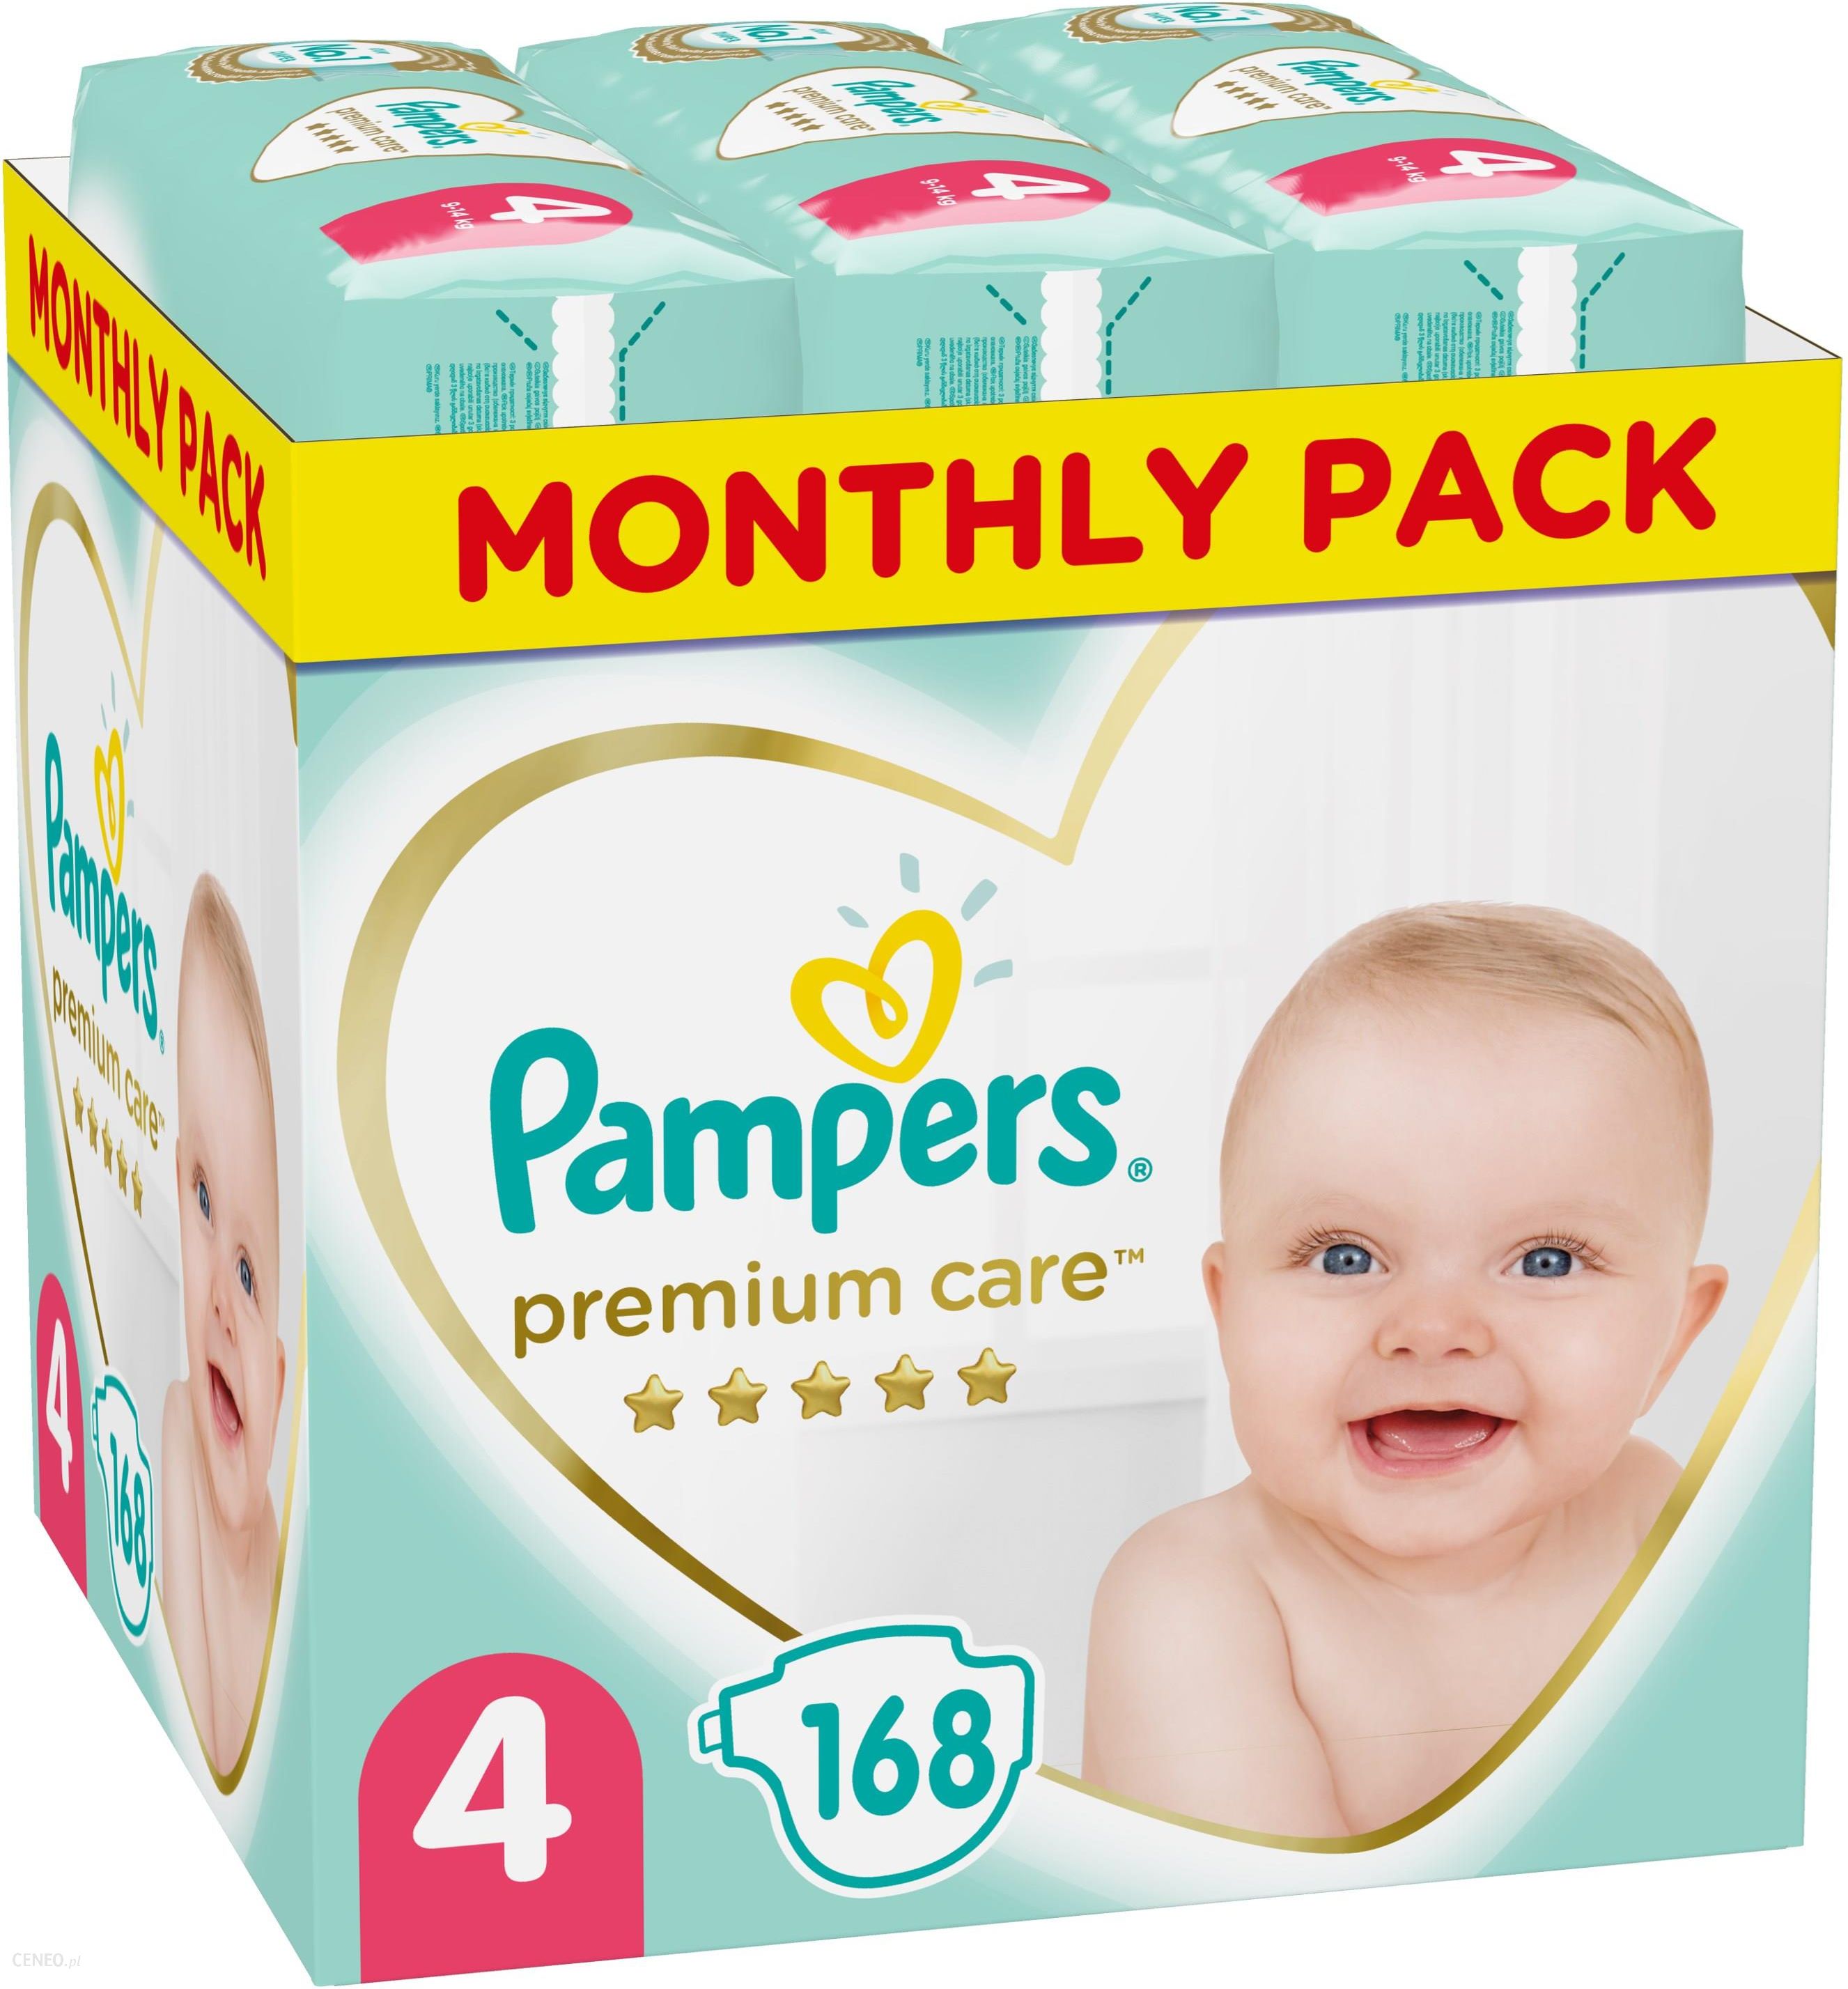 pampers wet wipes review